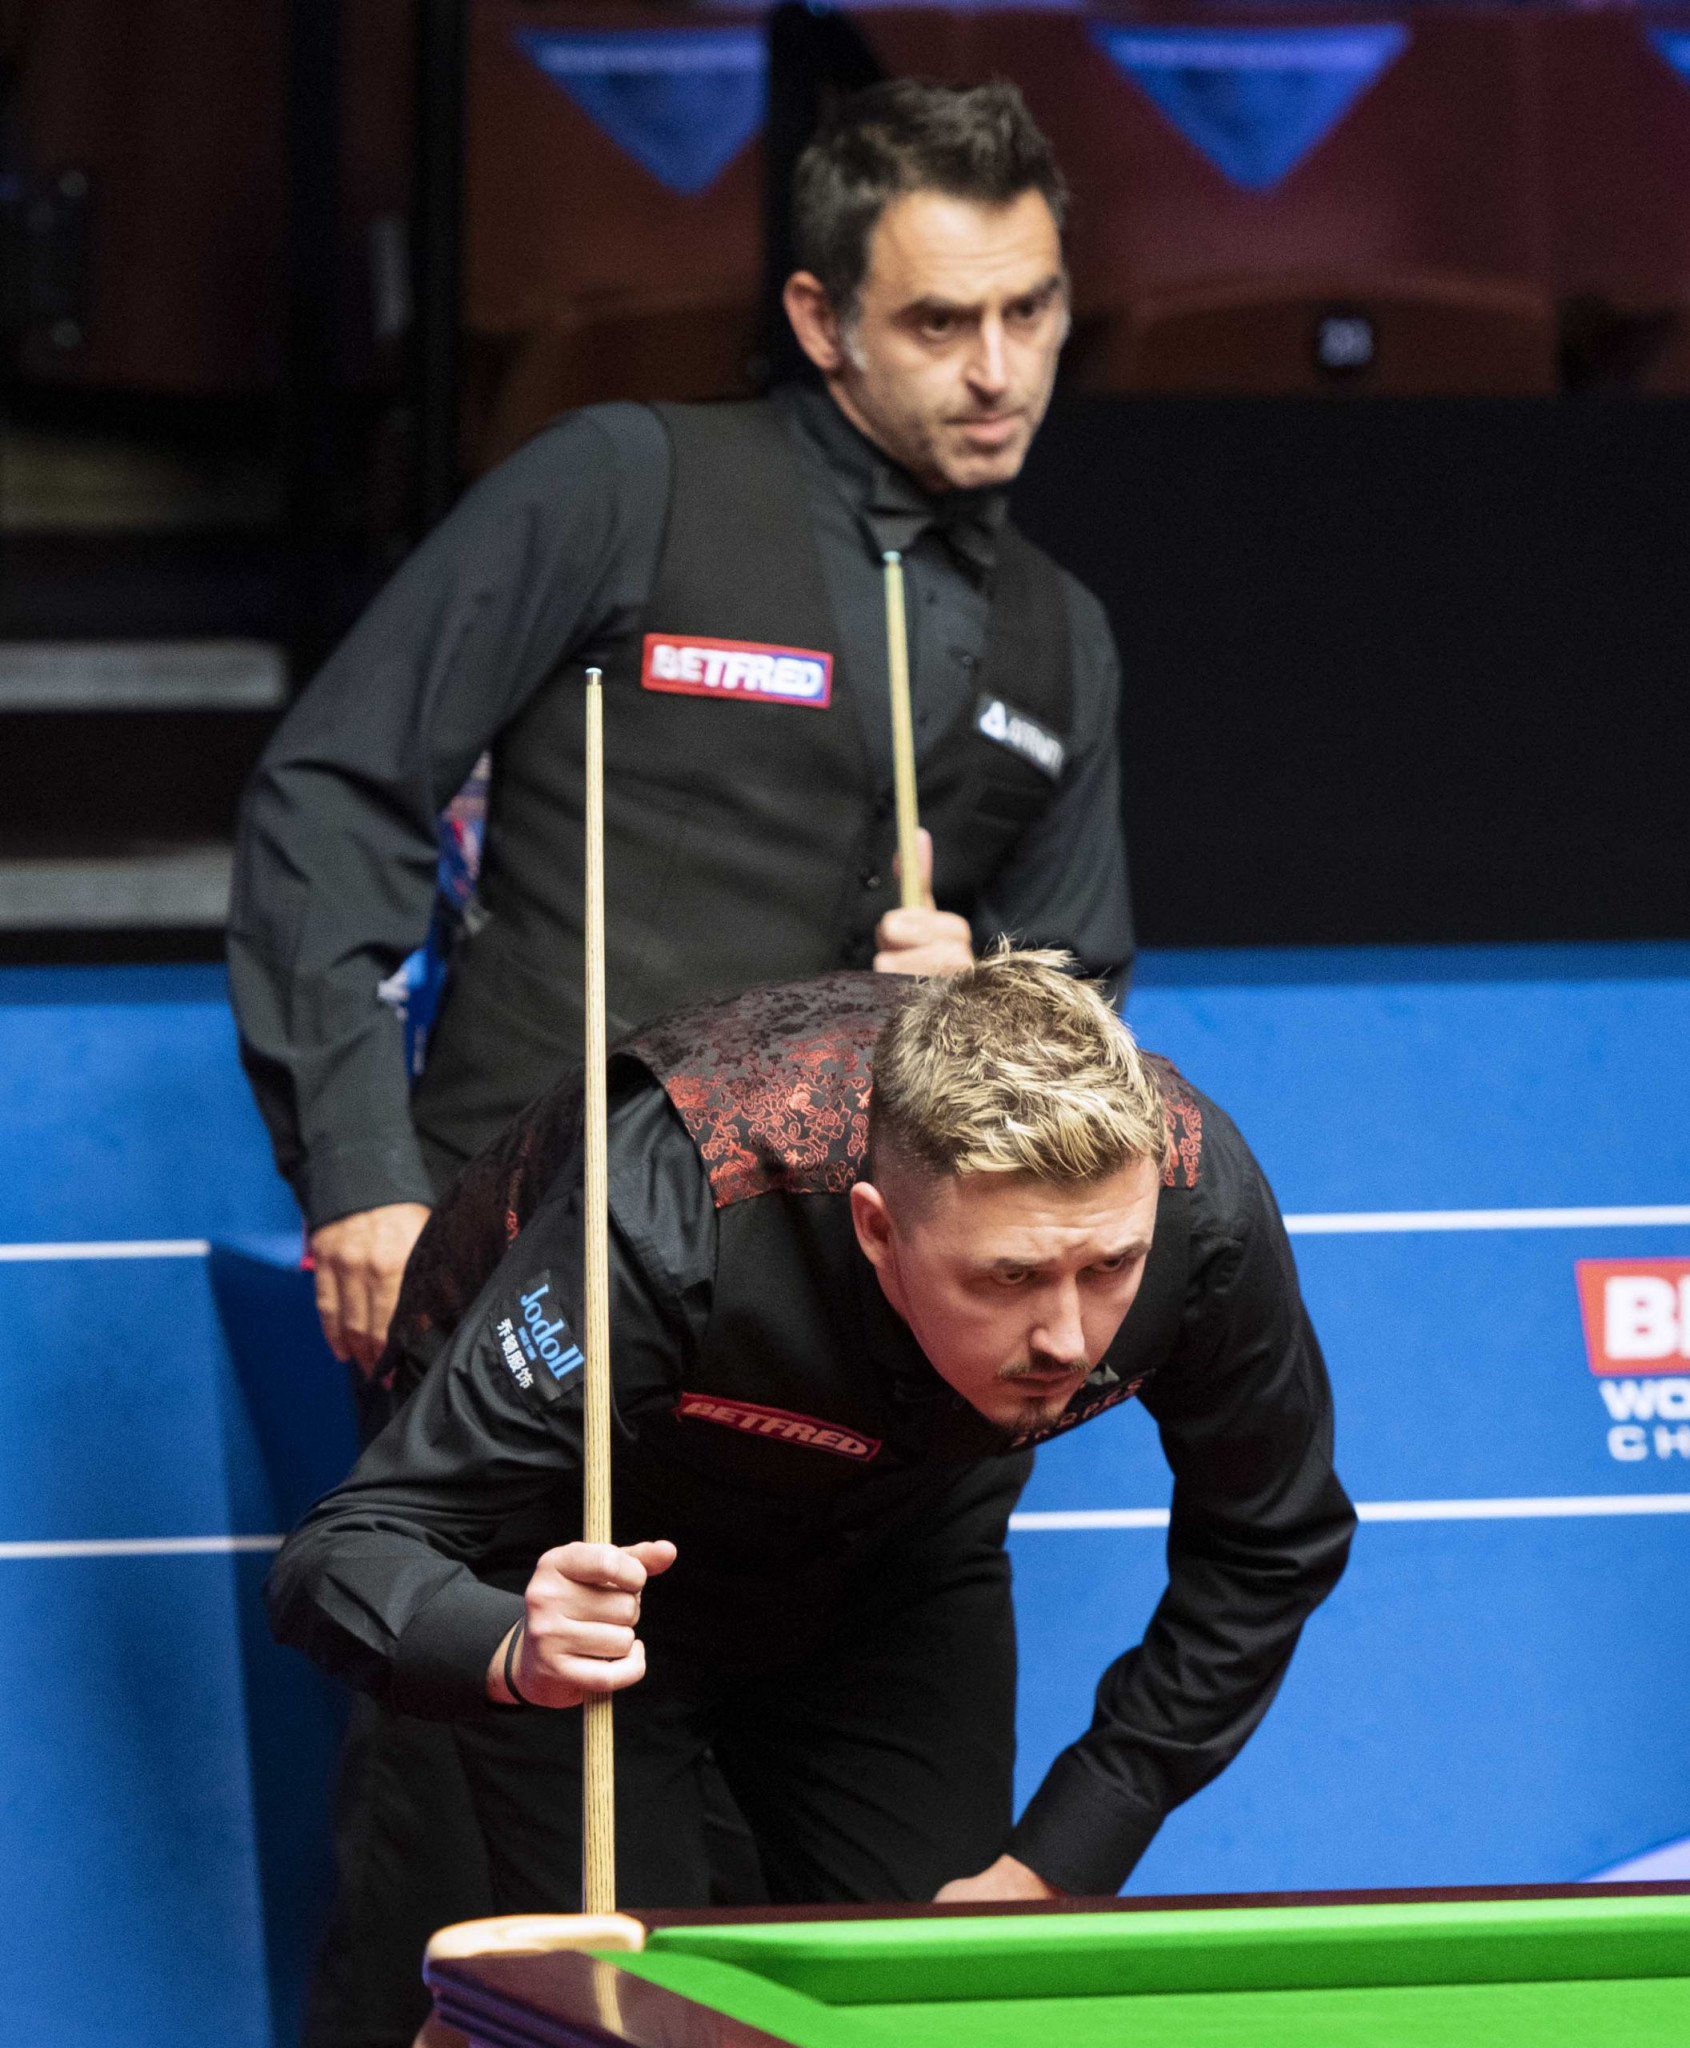 Kyren Wilson came back strongly in today's second session of the World Snooker Championship final at the Crucible Theatre when it looked like he might be overwhelmed by Ronnie O'Sullivan ©World Snooker